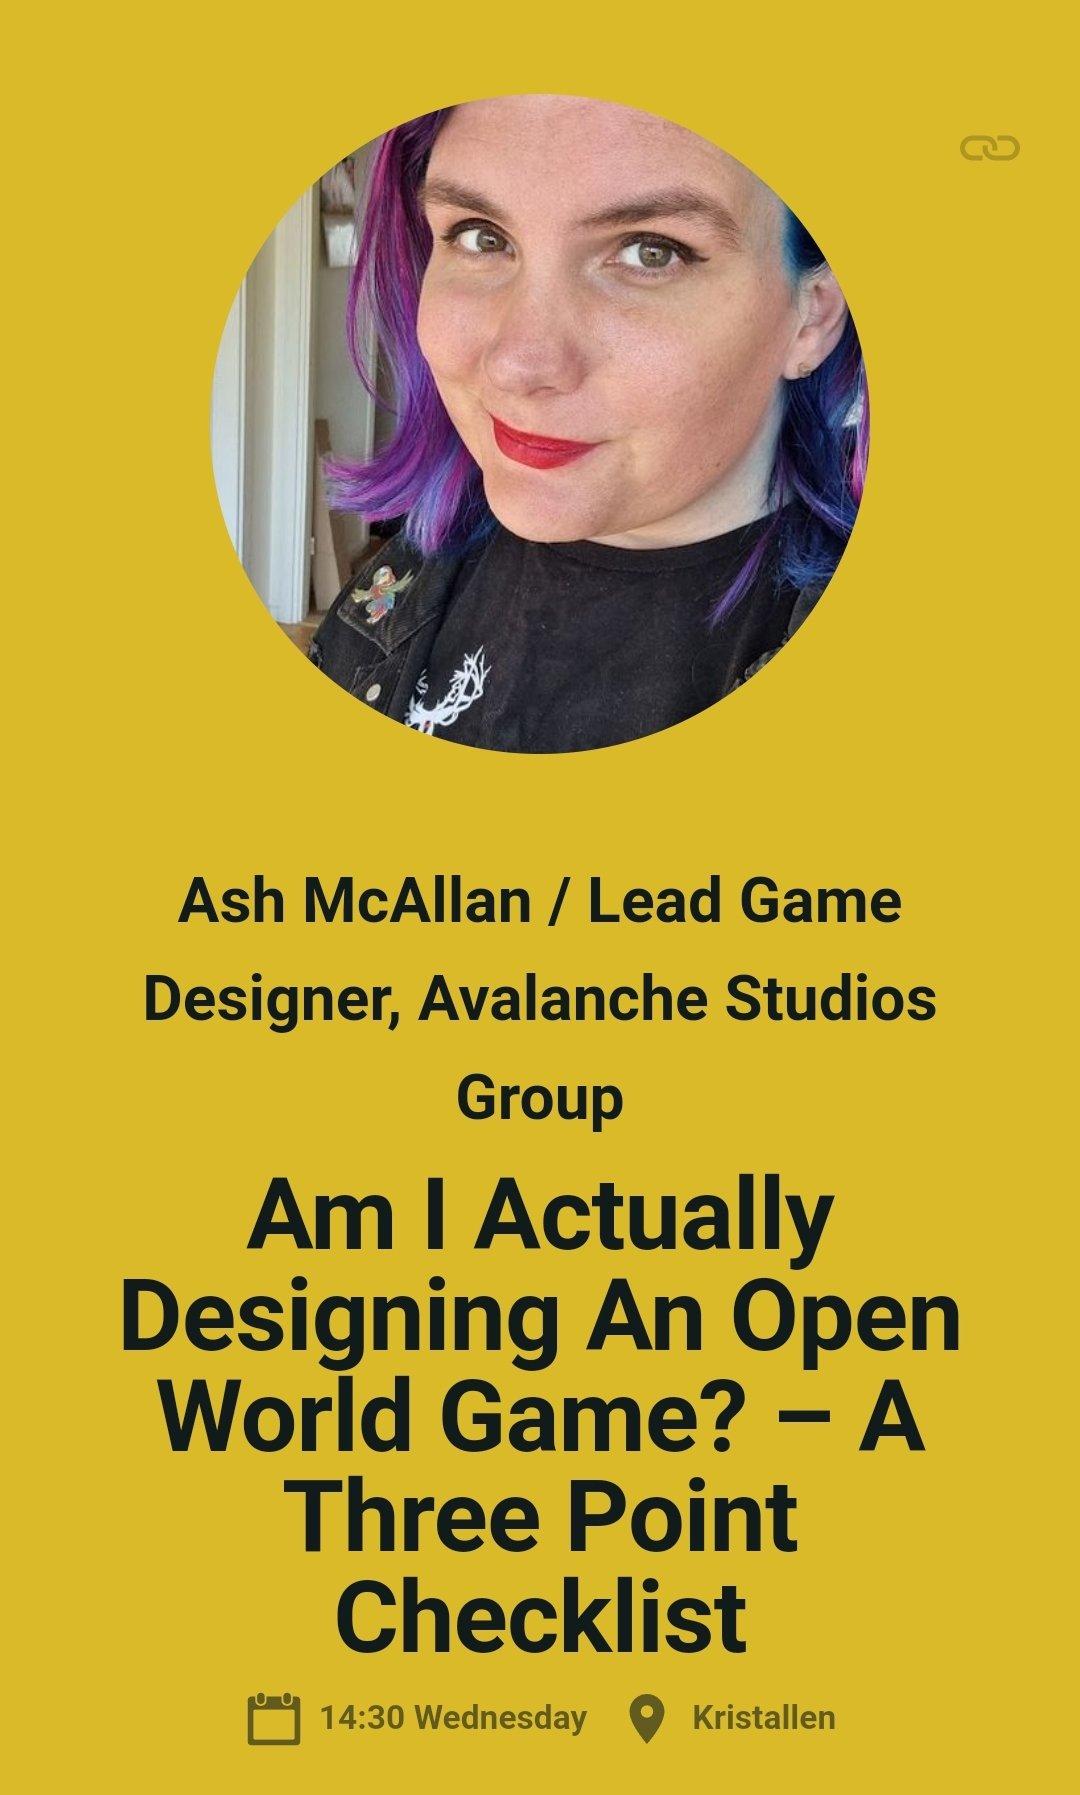 Ash's talk "Am I Actually Designing An Open World Game? - A Three Point Checklist" will be at 14:00 in Kristallen